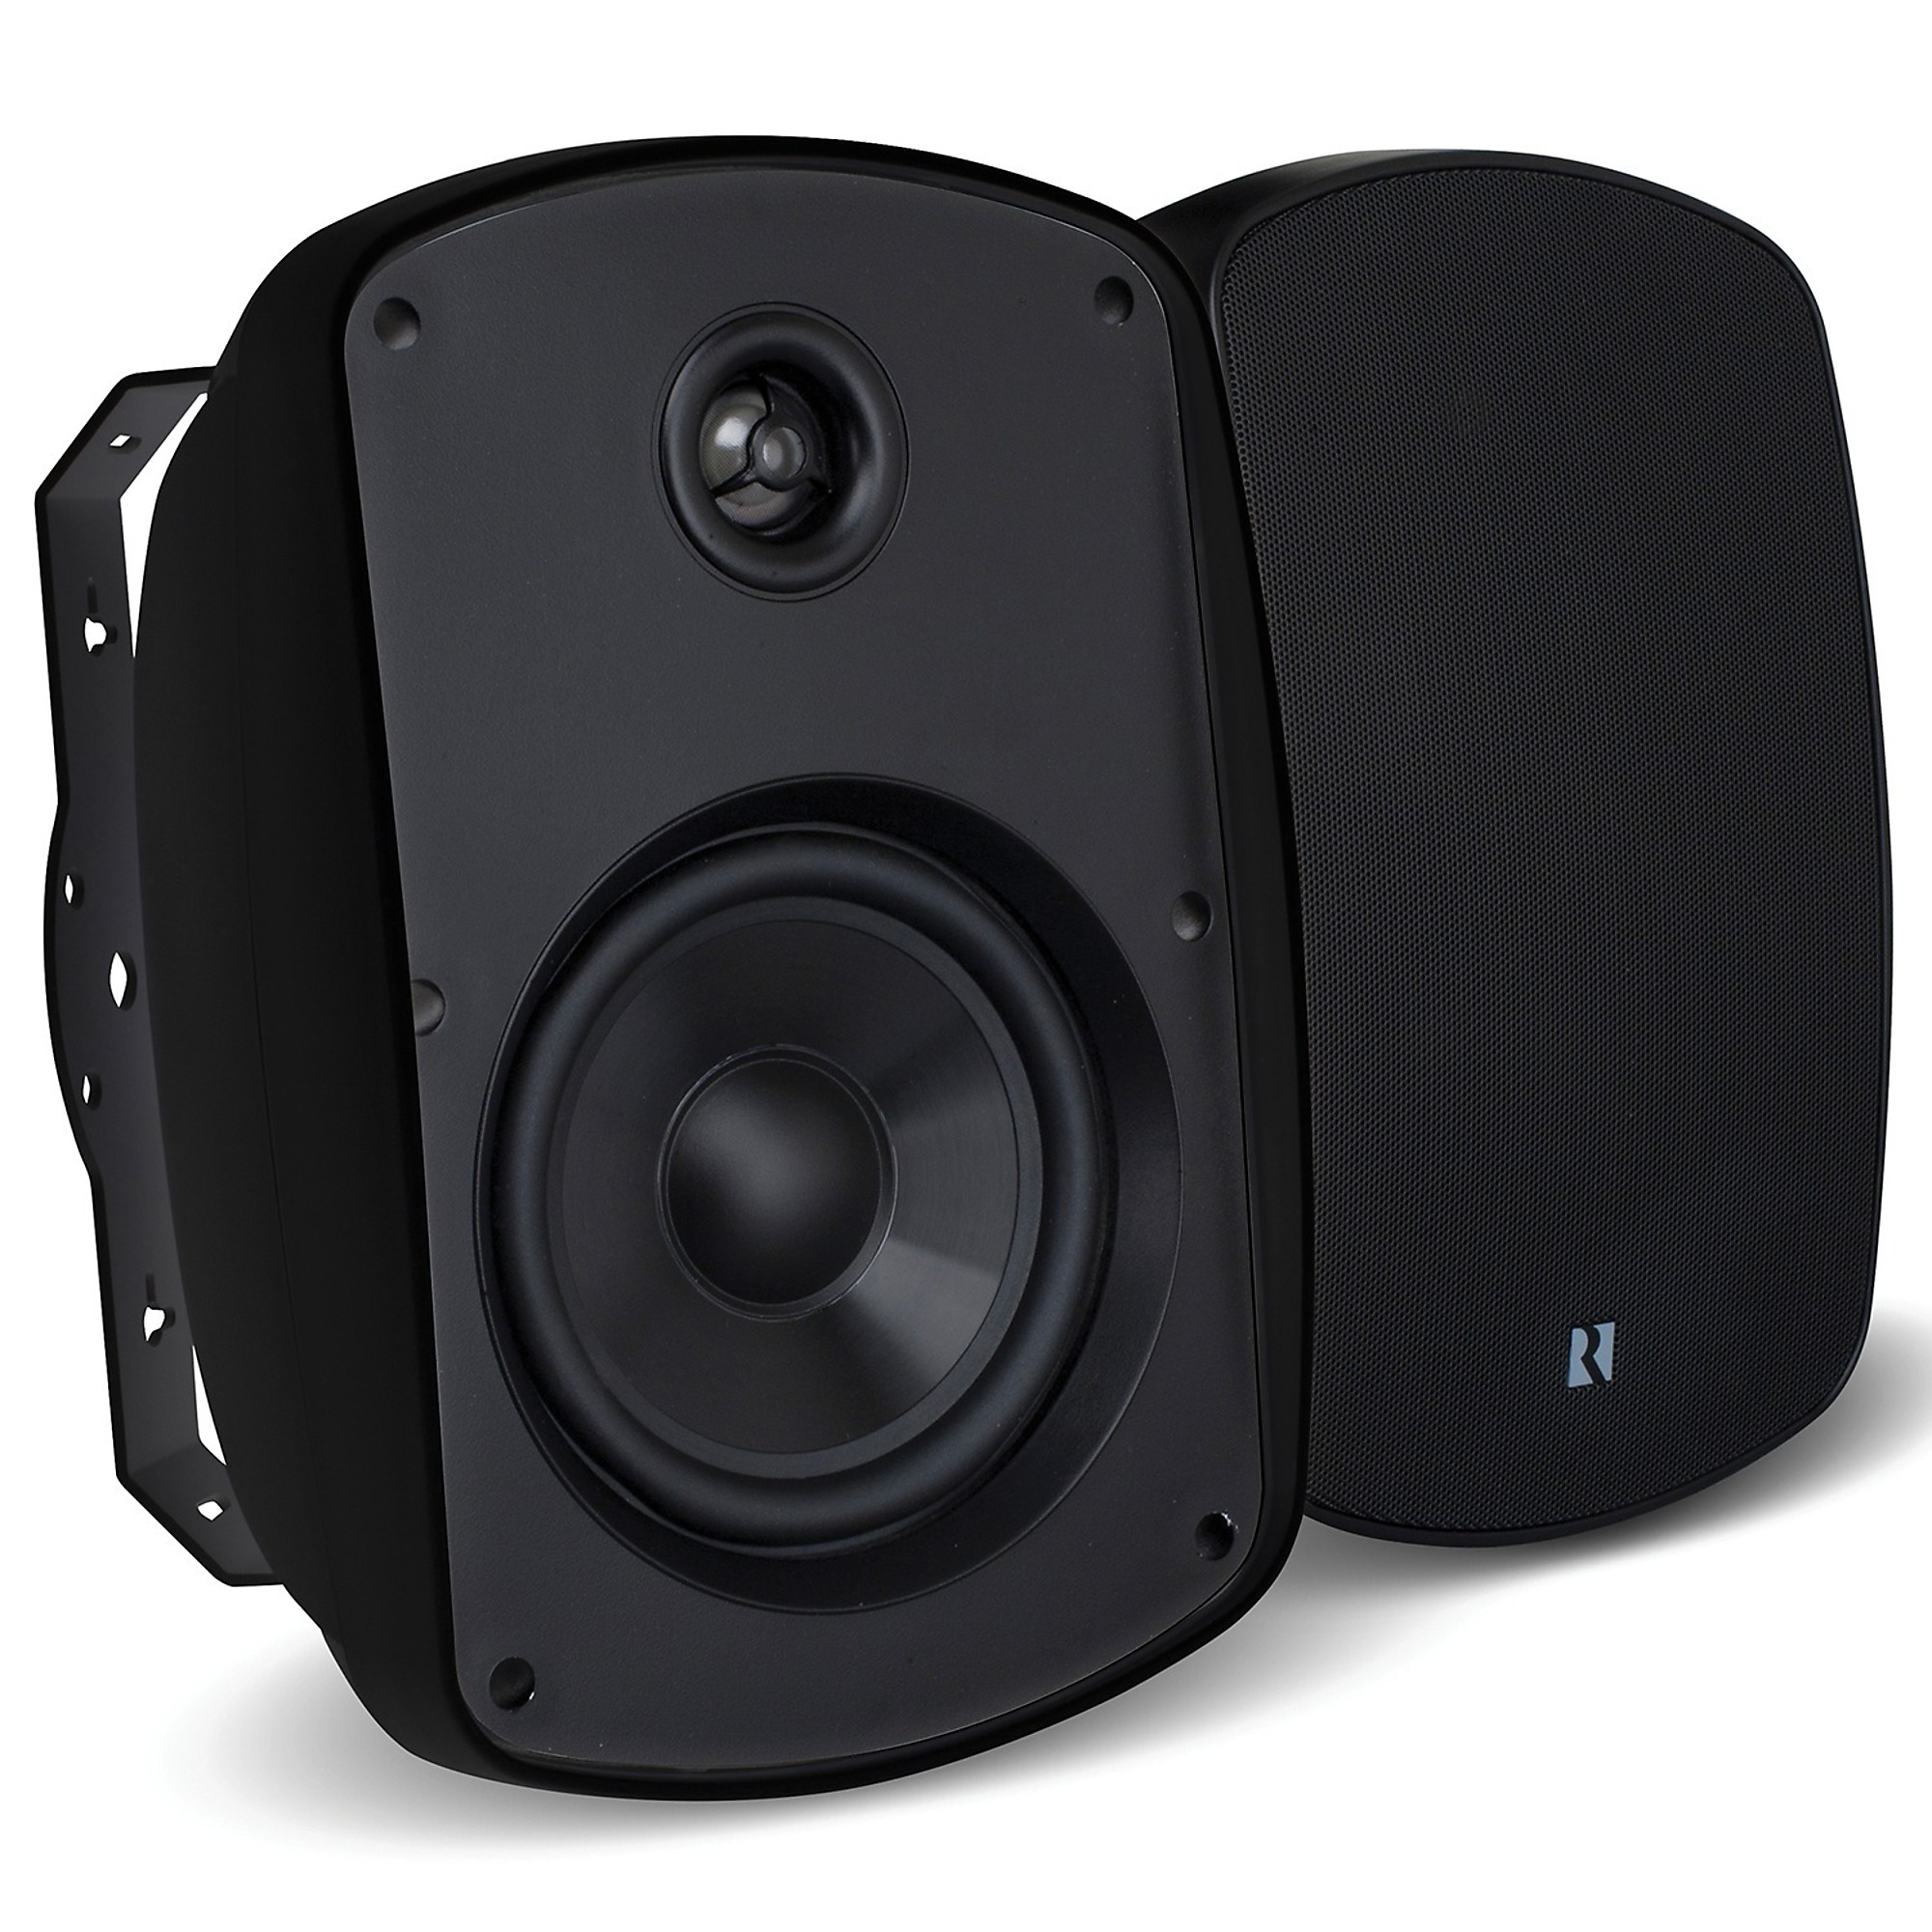 Russound Acclaim 5 Series, OutBack 5.25Inch 2-Way MK2 Outdoor Speakers, 2-Pack, Watts 125 Model 5B55mk2-B